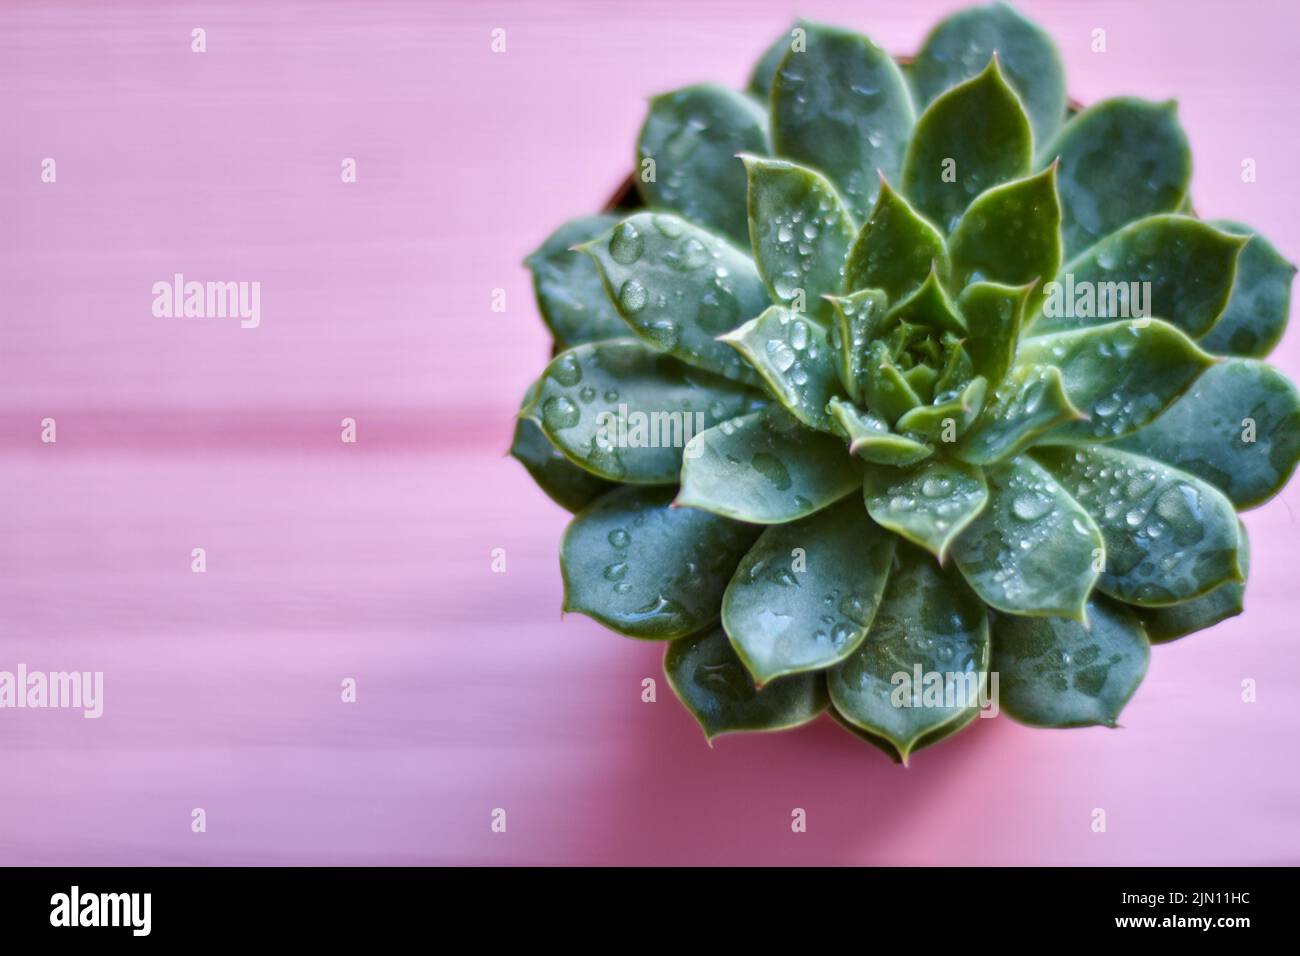 Top view sempervivum houseplant with droplets. Pink wood background with copy space. Stock Photo